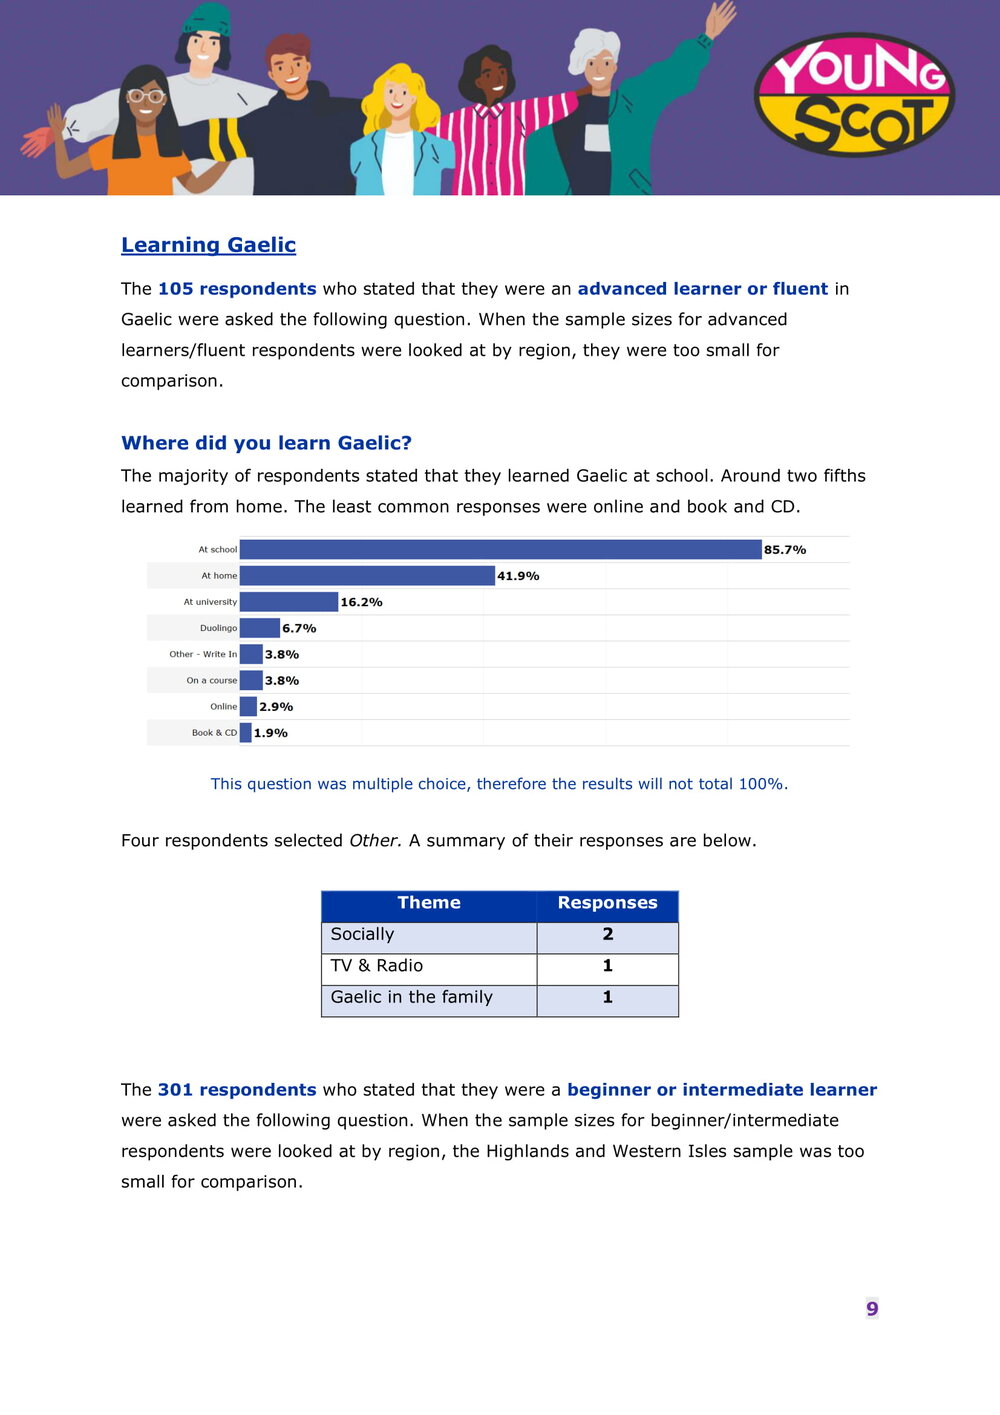 Engaging with Gaelic Online - Survey Results Report-10.jpg